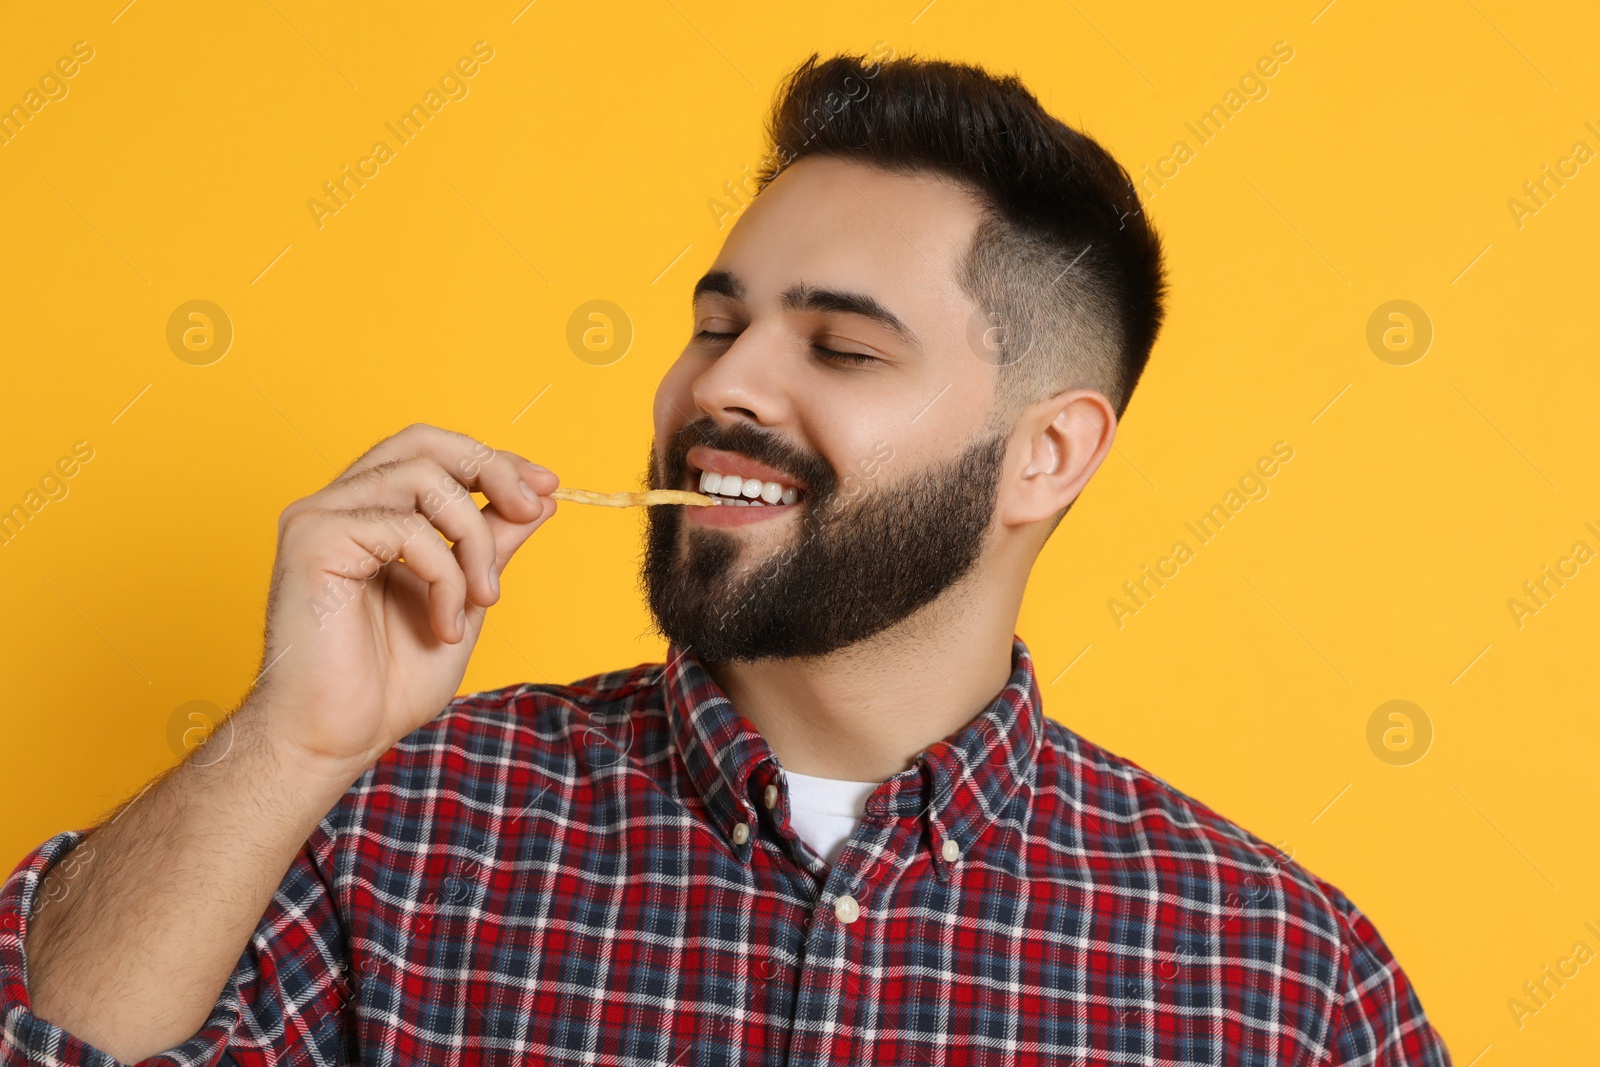 Photo of Young man eating French fries on orange background